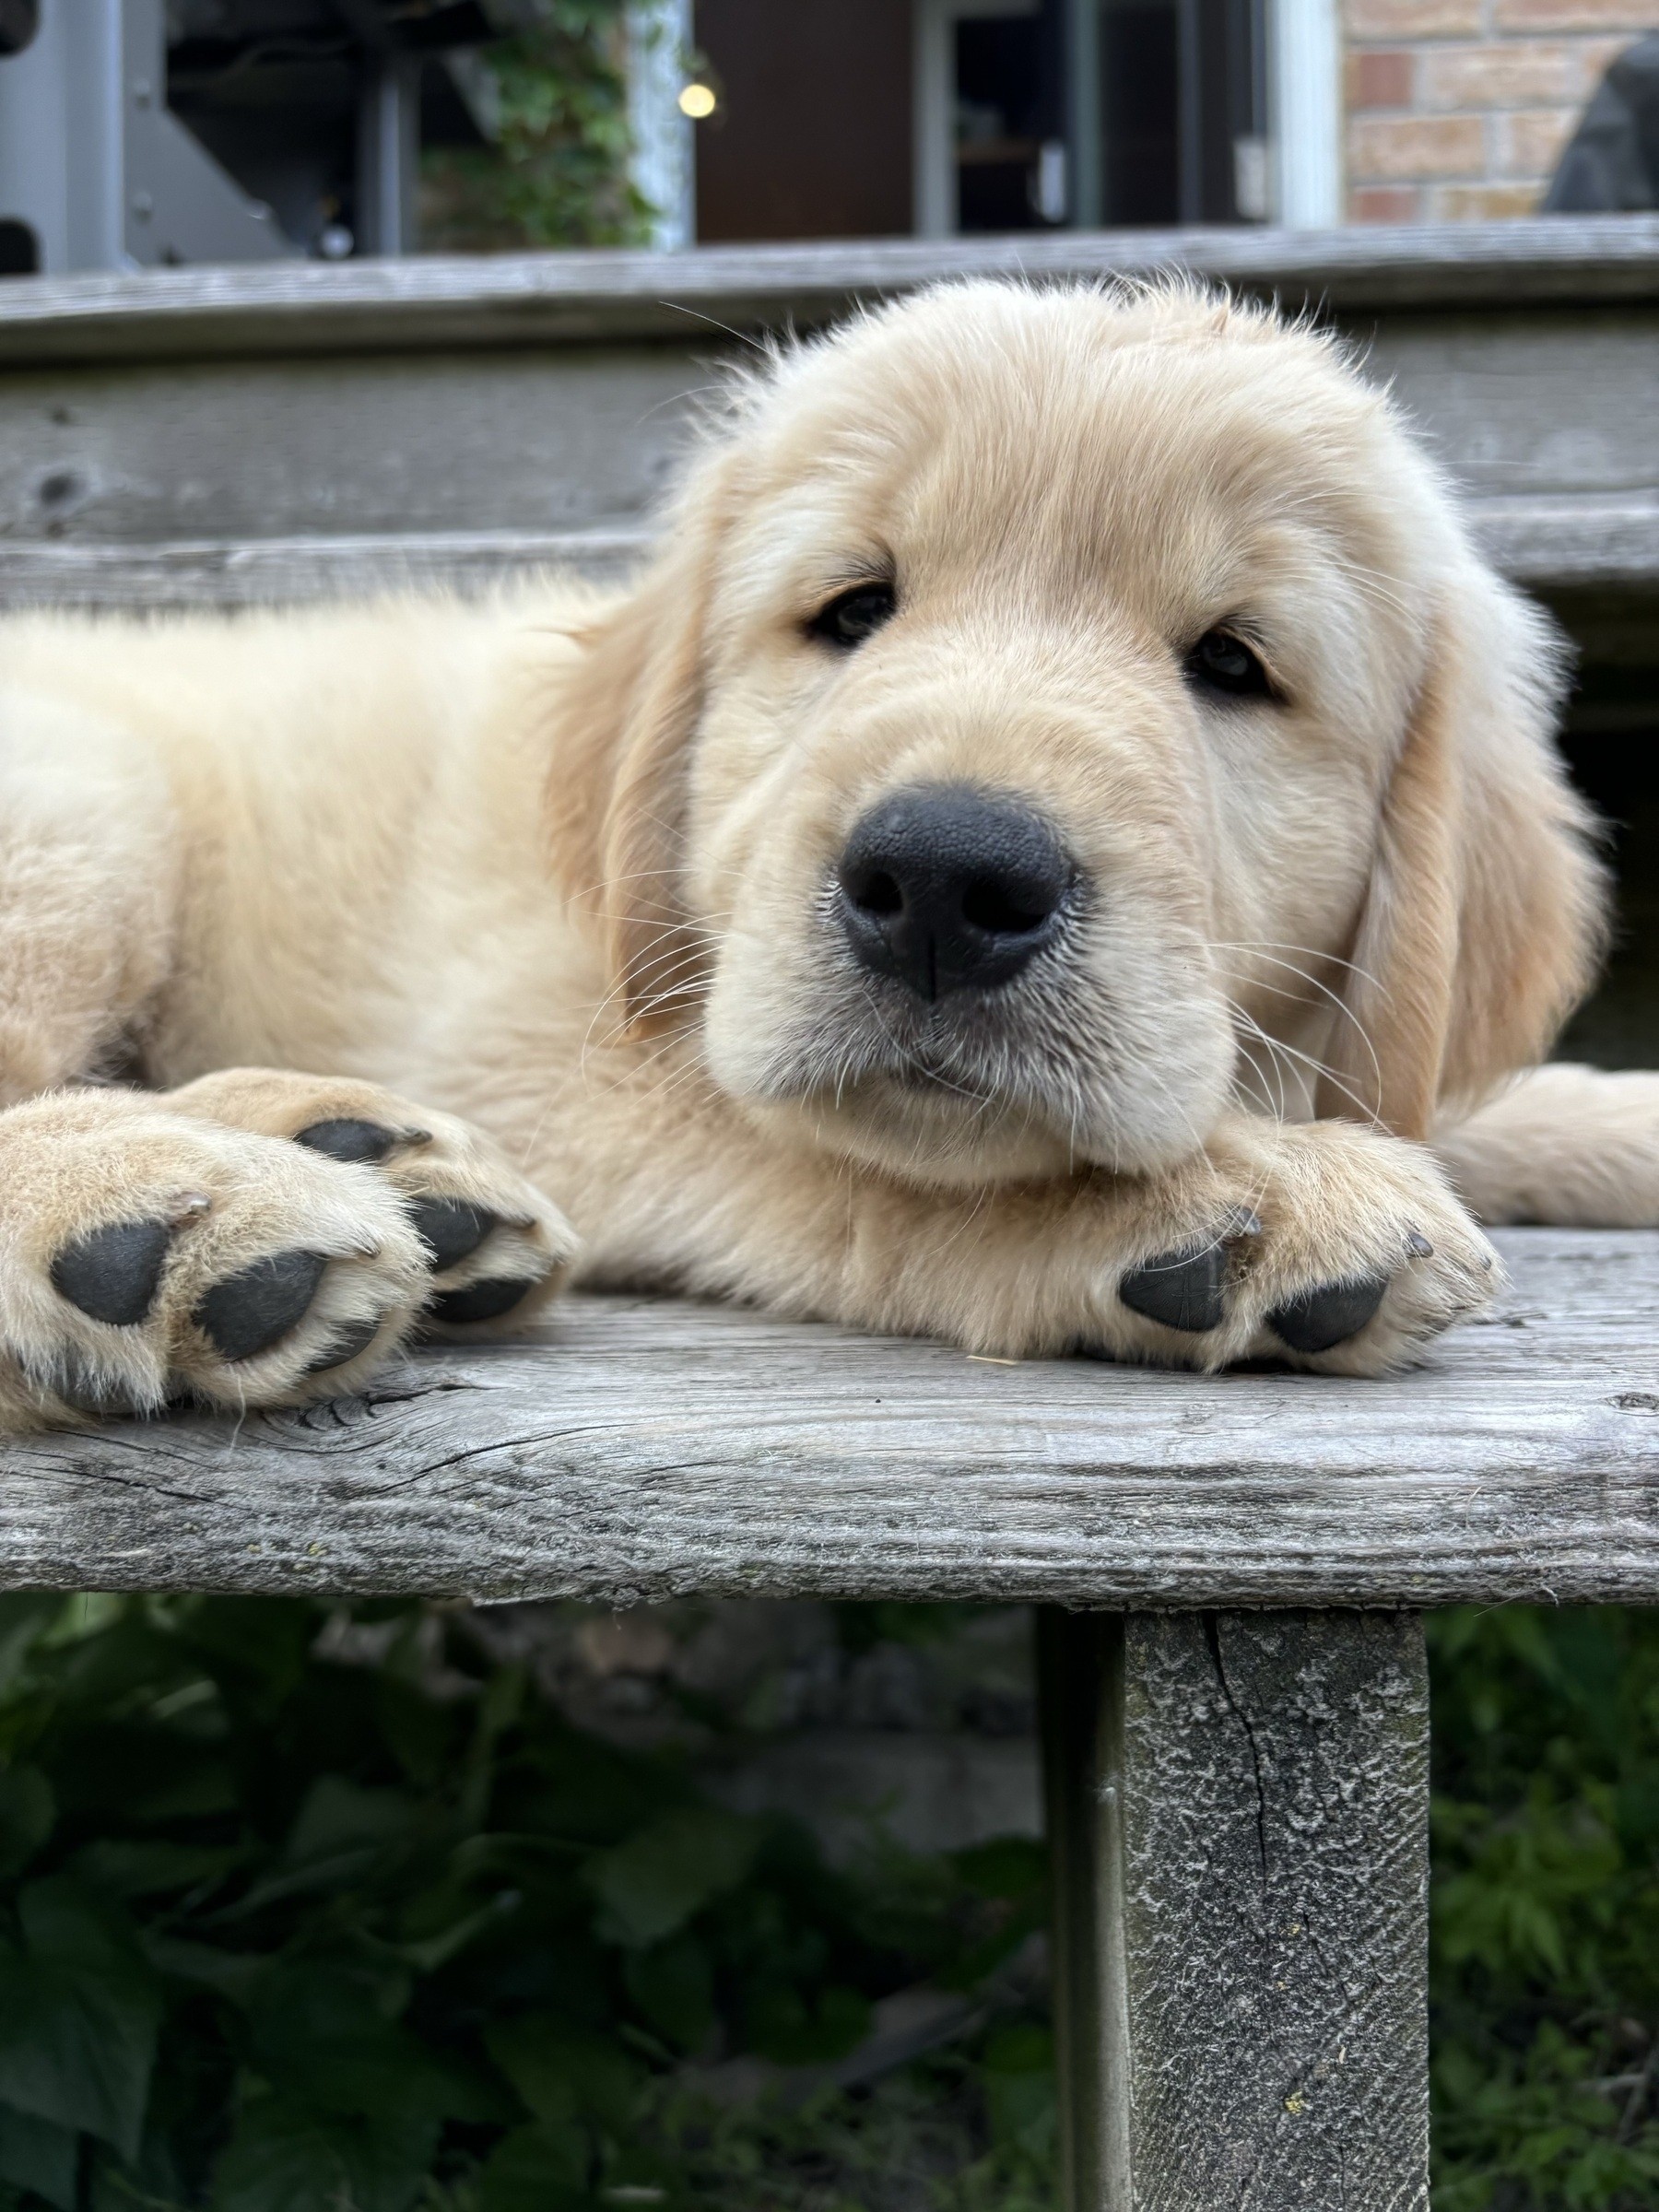 A fluffy golden retriever puppy is resting on a wooden surface while looking into the camera.